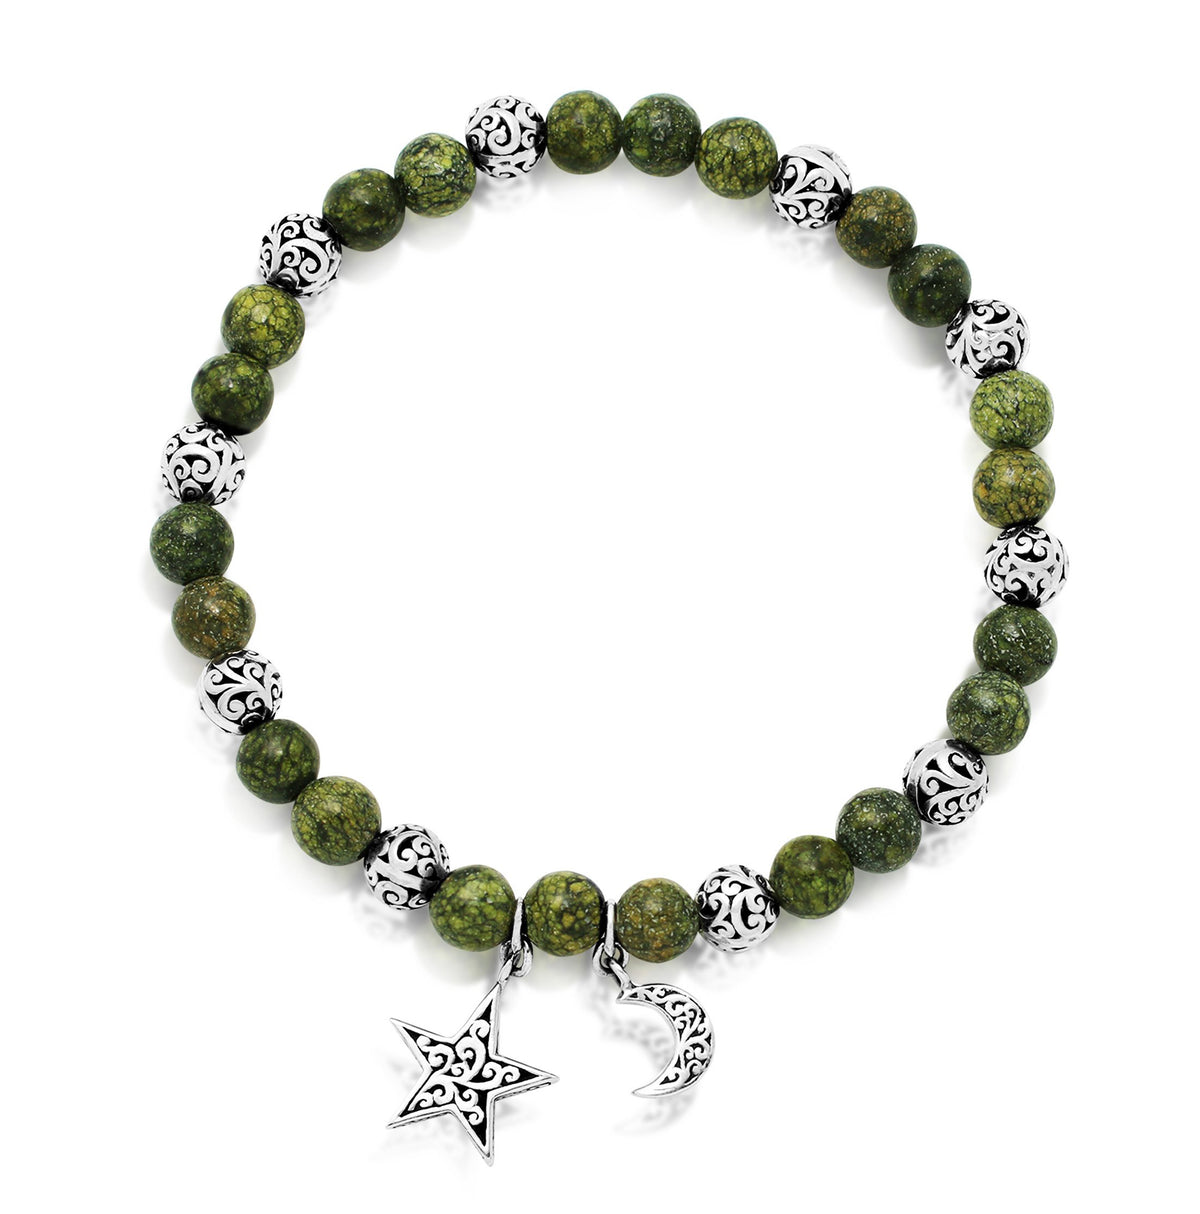 Green Turquoise Bead (6mm) with Scroll Sterling Silver Bead and Moon Star Hang Stretch Bracelet